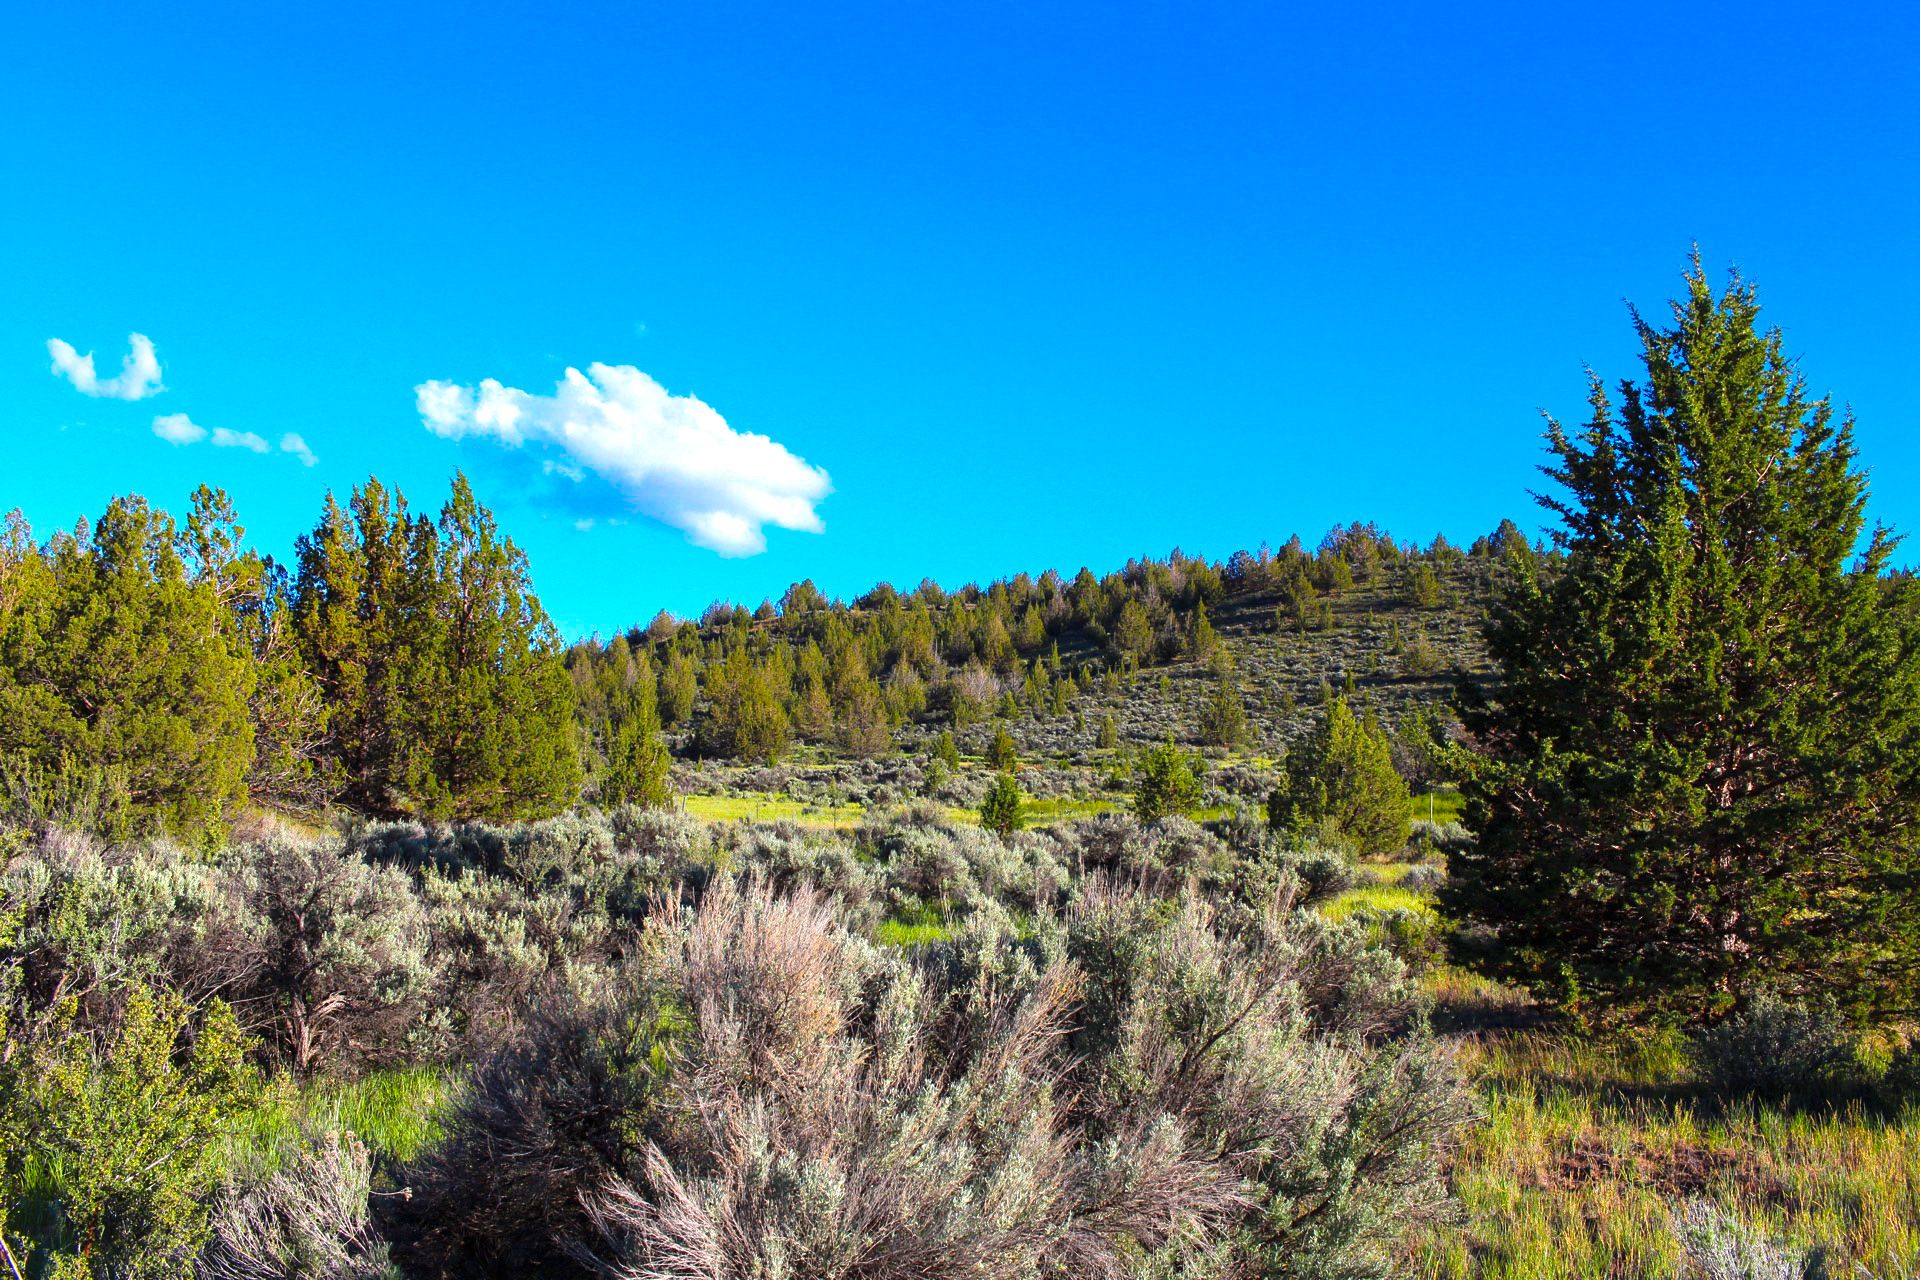 Nearly an Acre of Pine Forest in California Pines, Modoc County, California!